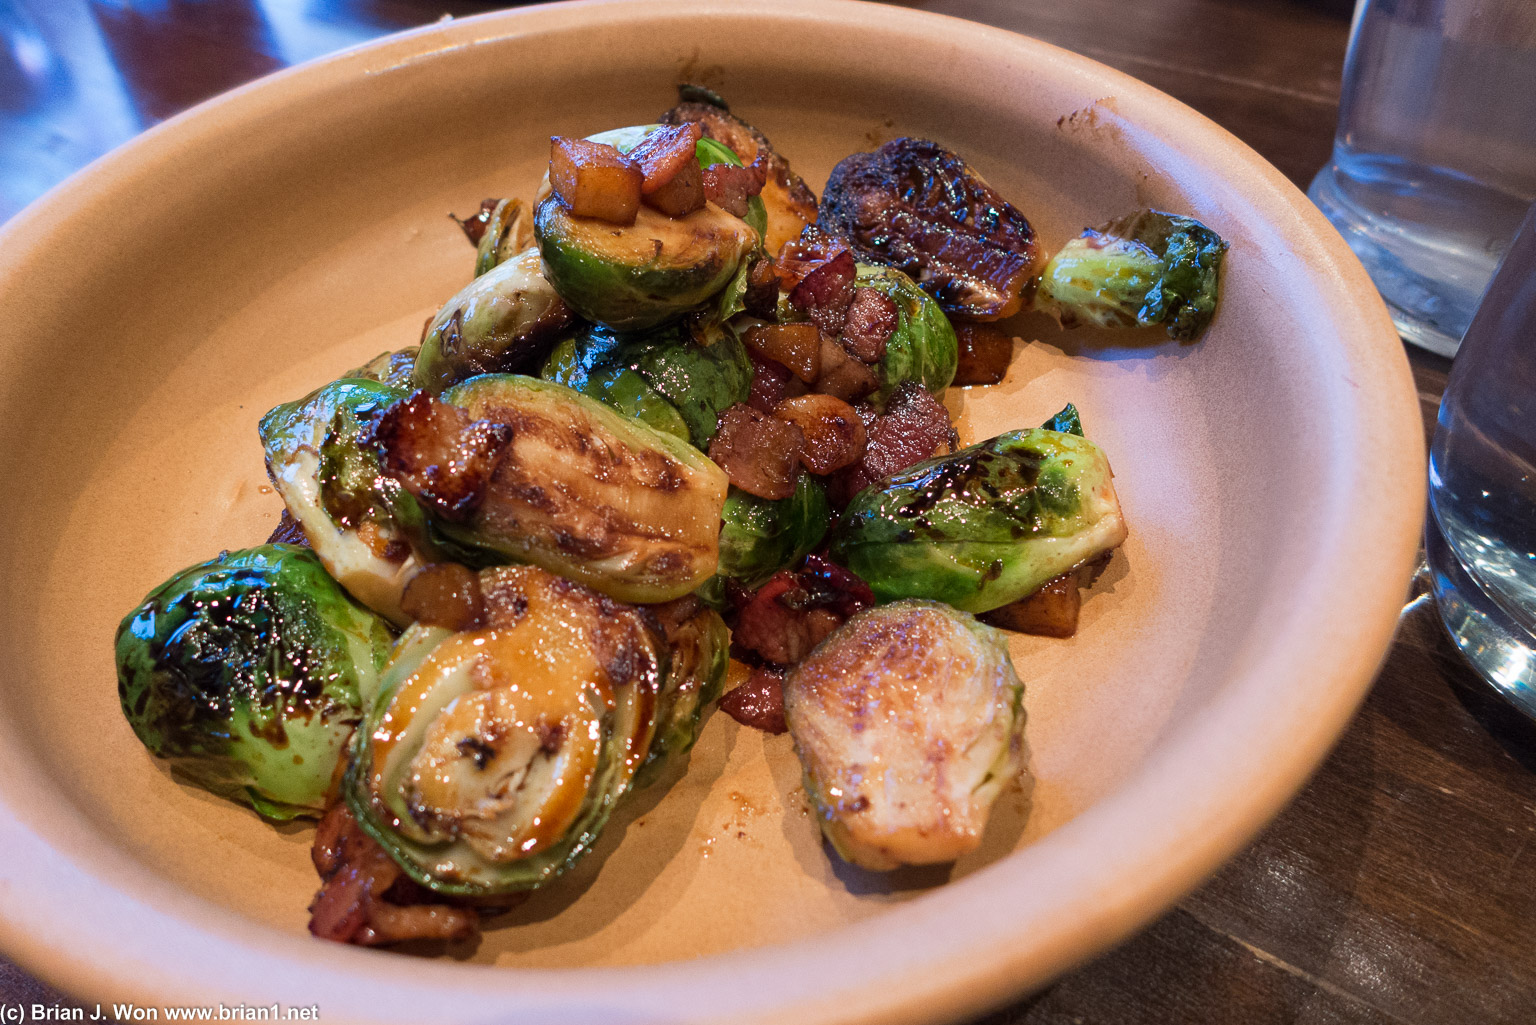 Brussel sprouts were pretty good.